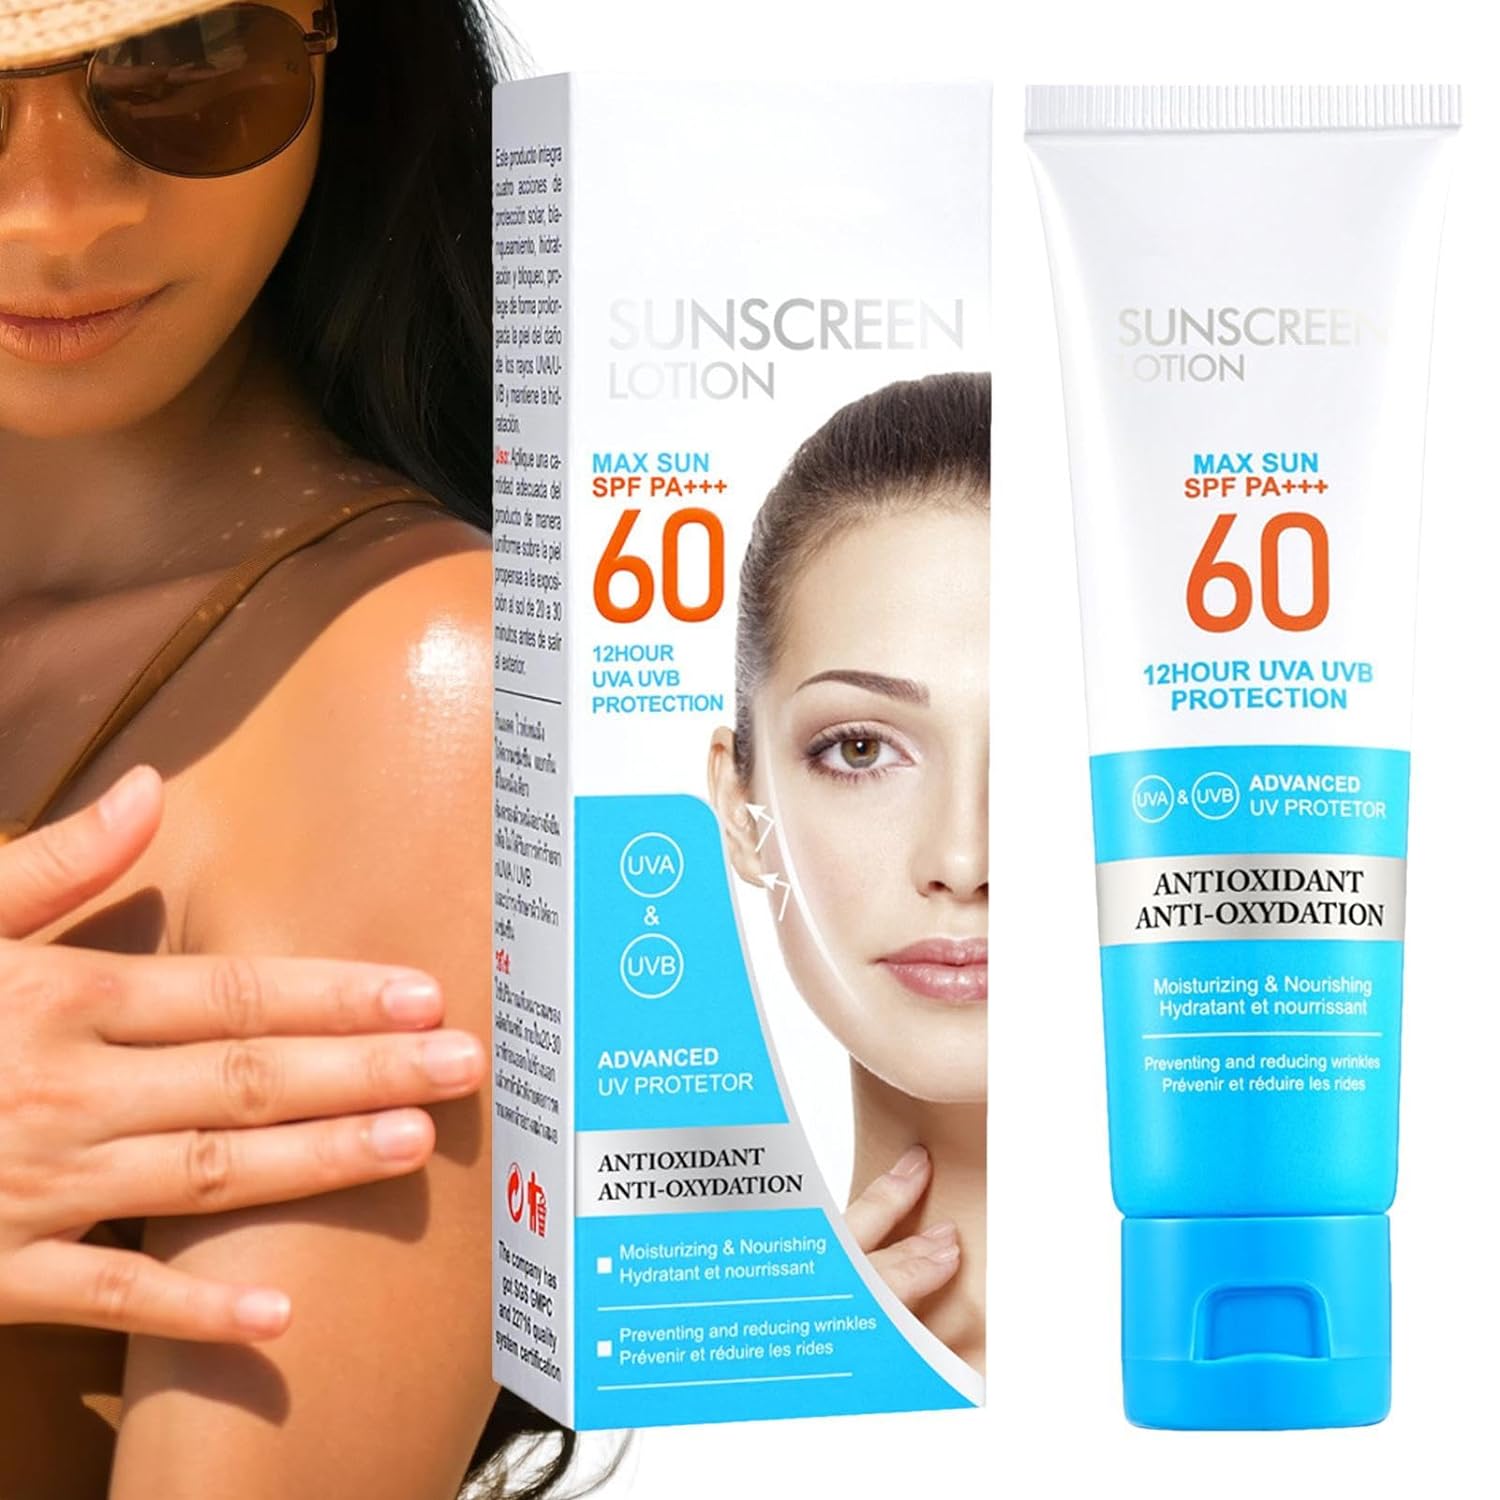 Sports Sun Protection, Face Isolation SPF 60 PA+++ Wide Spectrum Waterproof Sunscreen, 50ml Refreshing Sun Protection Cream Lotion for UV Protection and Facial Care Hudhowks